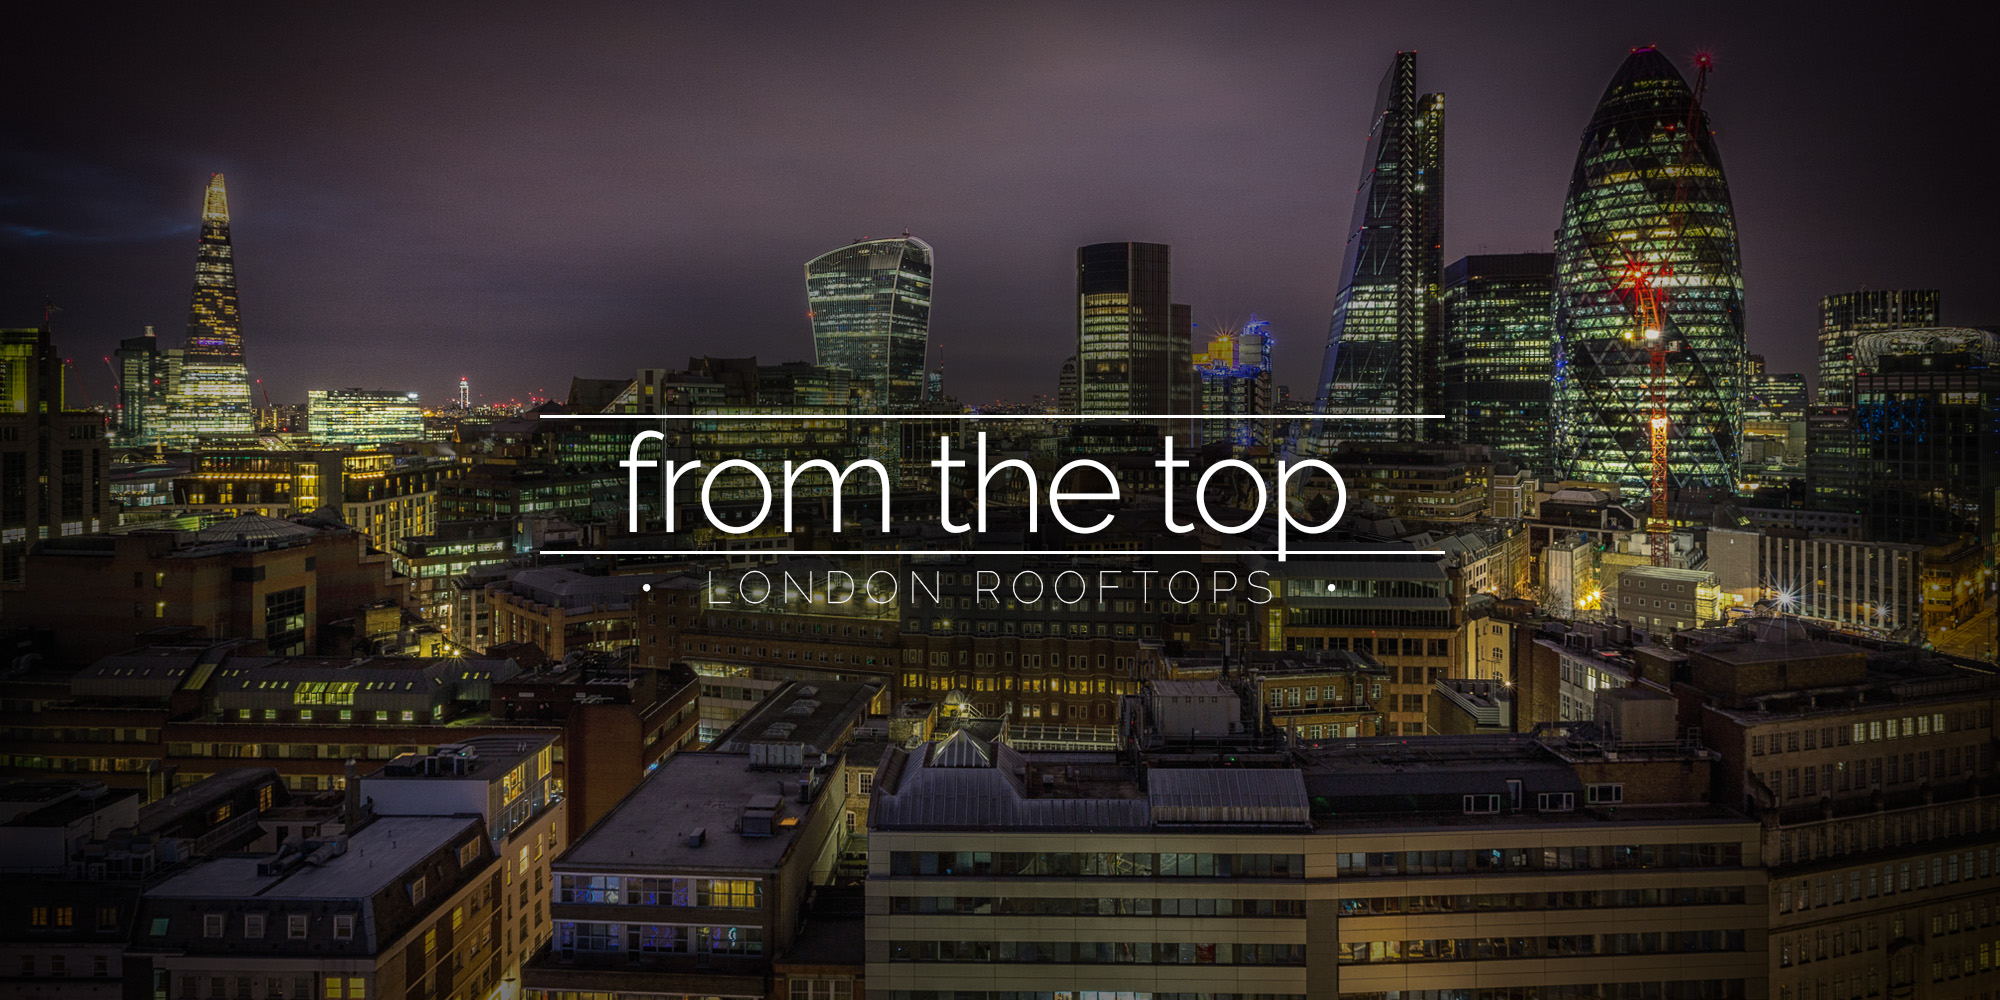 Take it from the top - London Rooftops